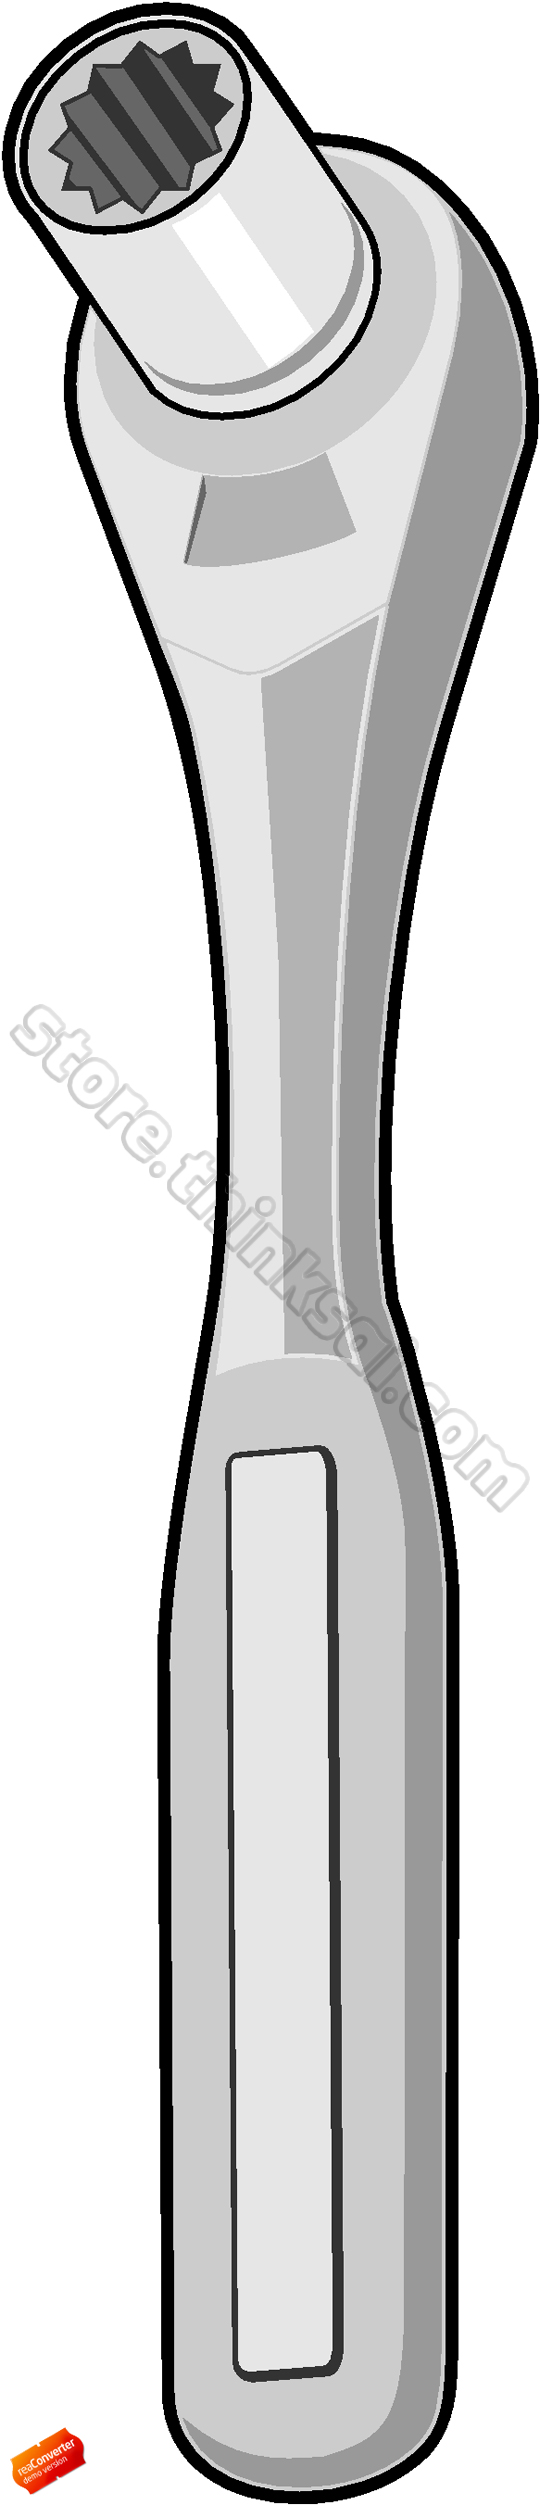 Socket Wrench Clipart Tools Wrench 09 Socket Wrench